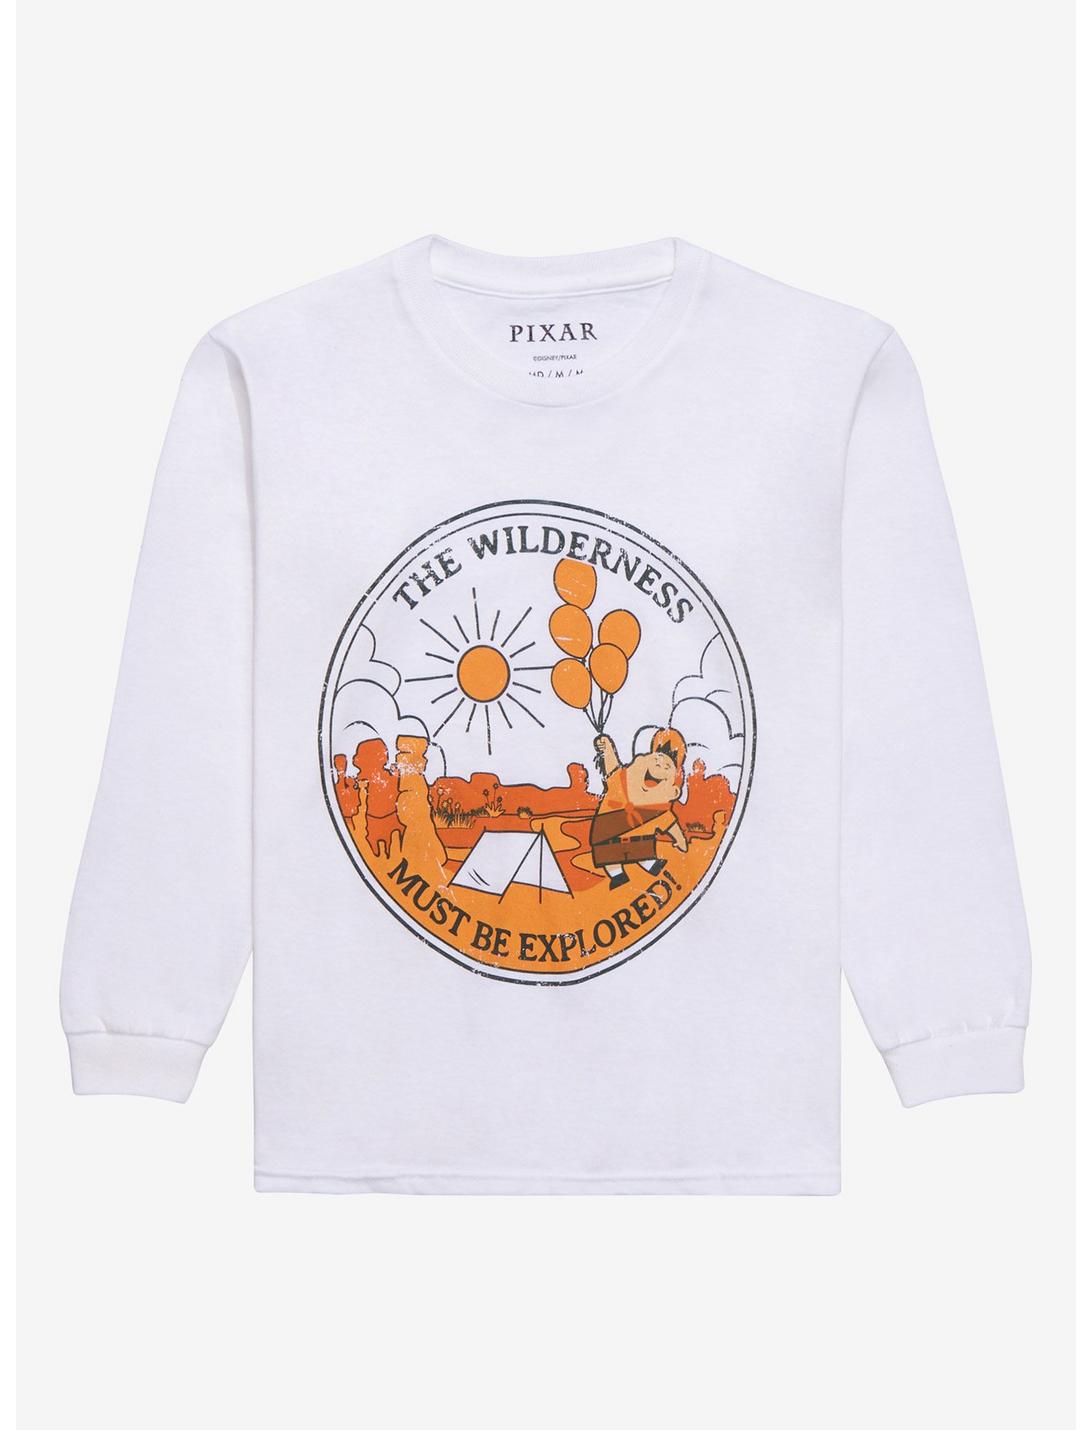 Disney Pixar Up Wilderness Must Be Explored Youth Long Sleeve T-Shirt - BoxLunch Exclusive, NATURAL, hi-res